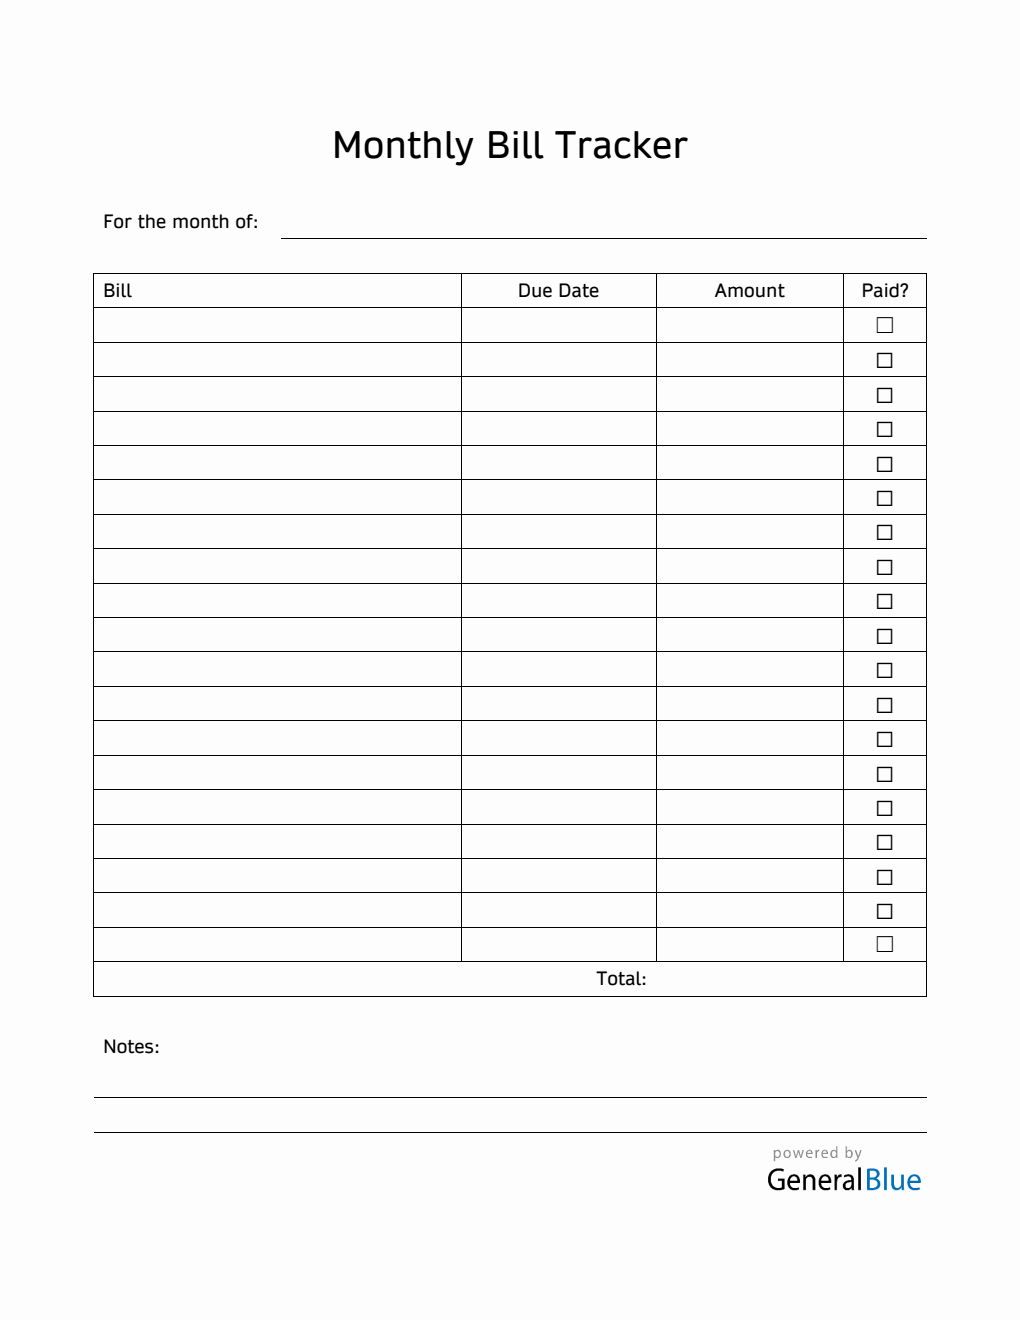 Monthly Bill Tracker in Word (Printable)